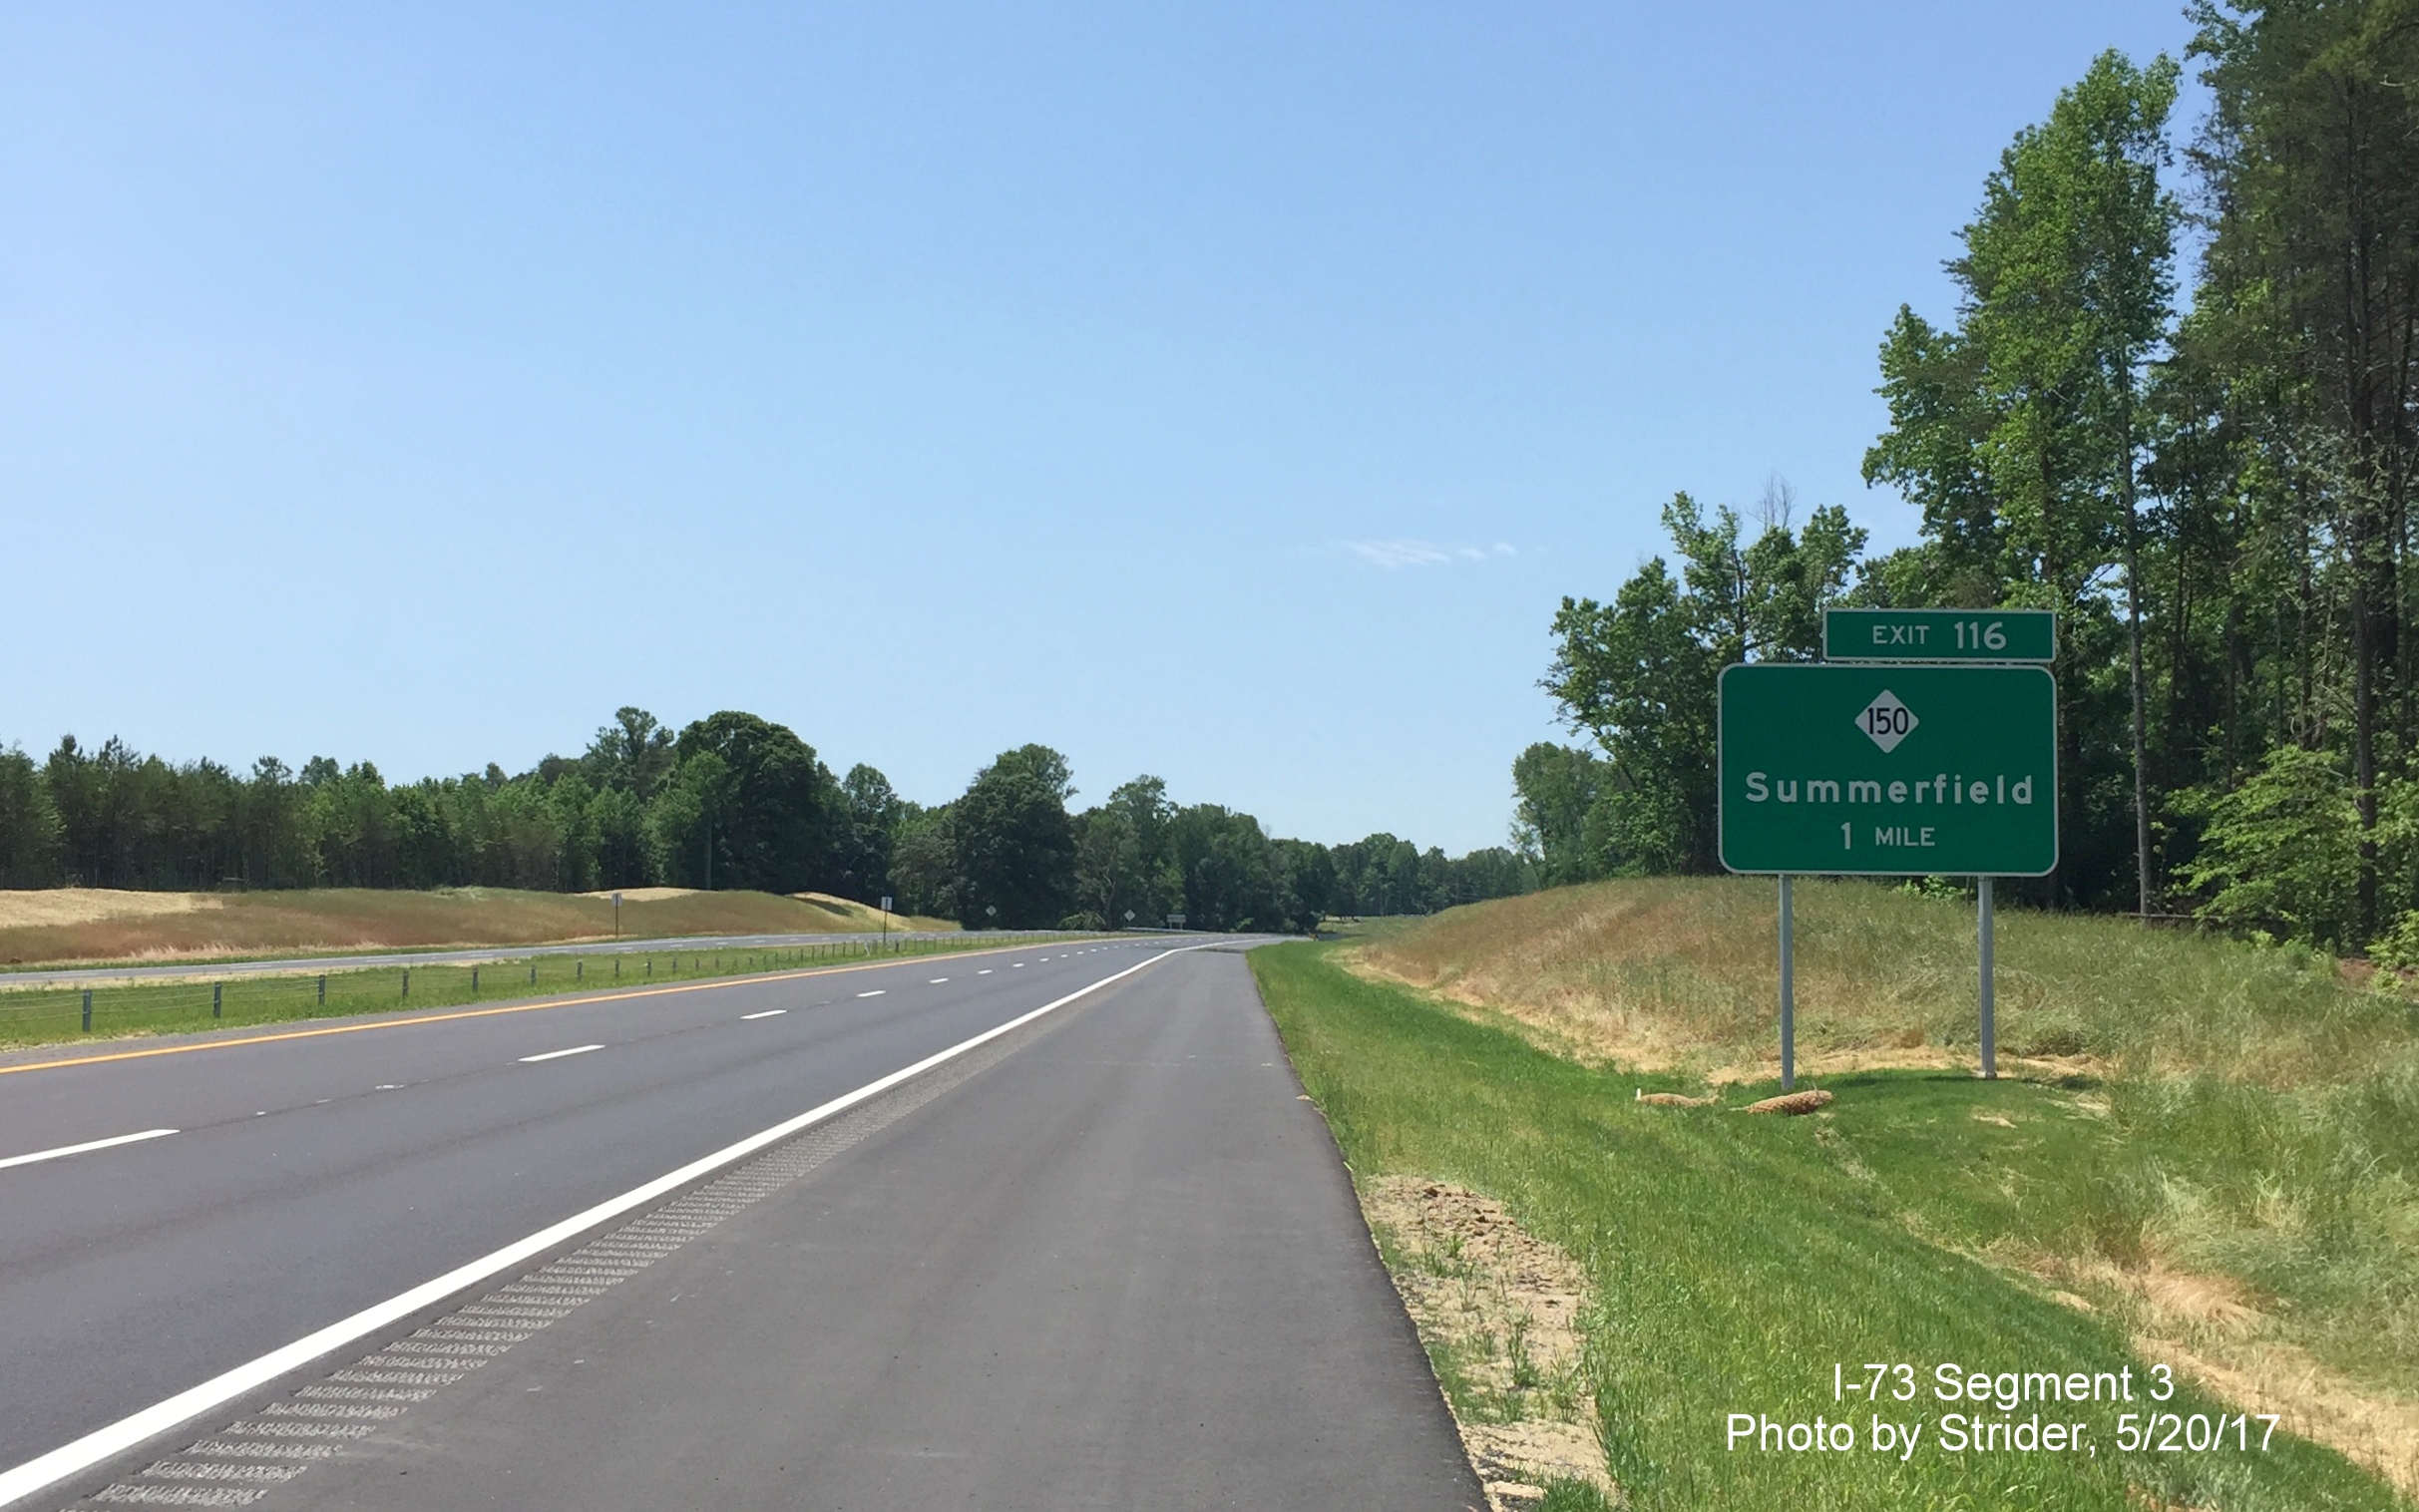 Image taken of NC 150 2 mile advance exit sign on newly opened I-73 South highway, by Strider